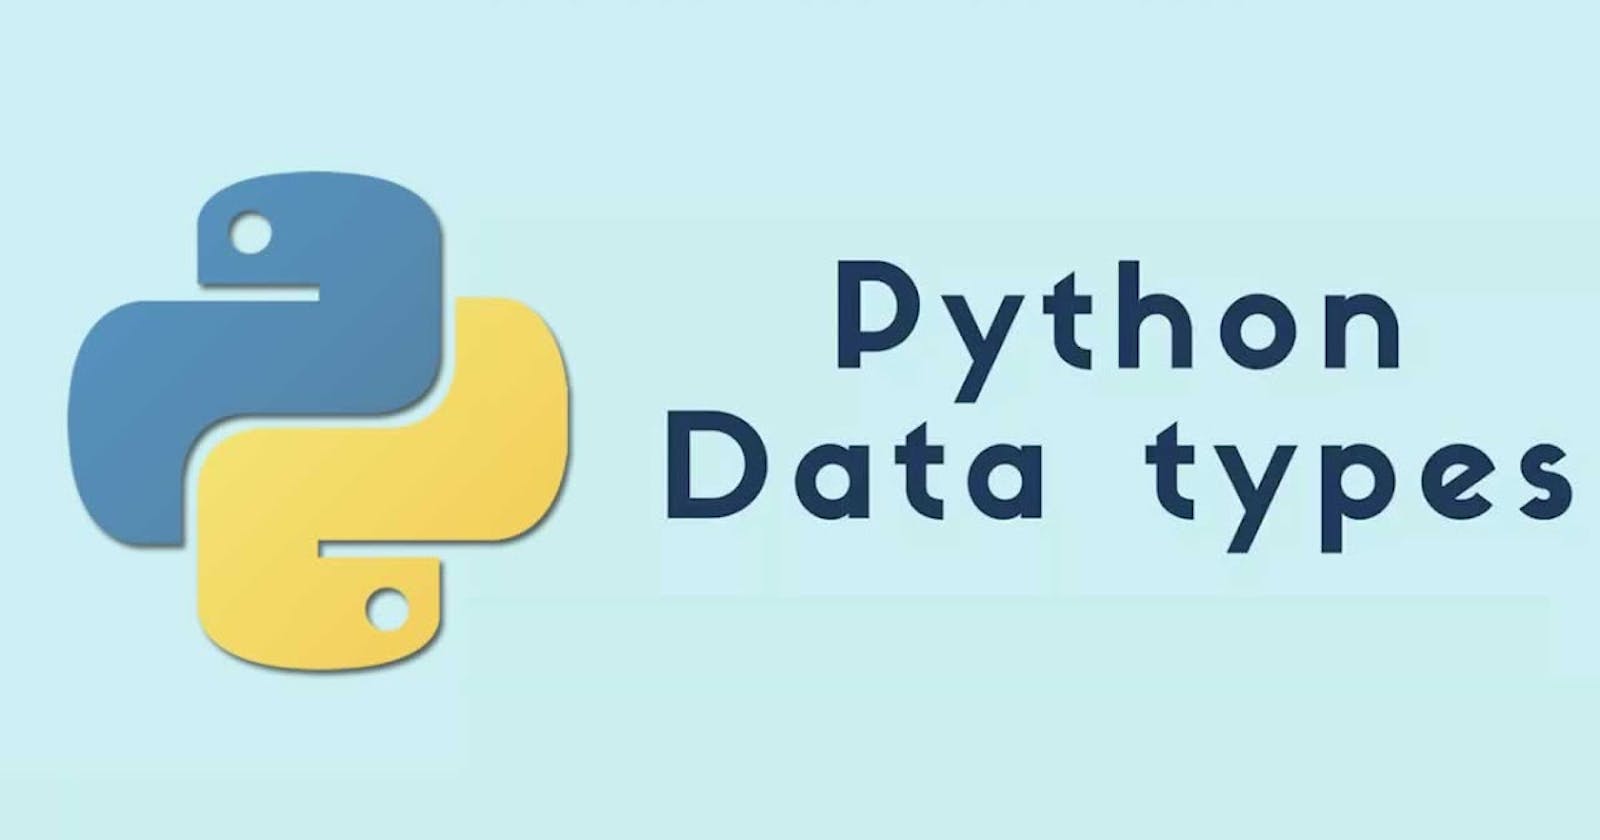 Day 14 Task: Python Data Types and Data Structures for DevOps: